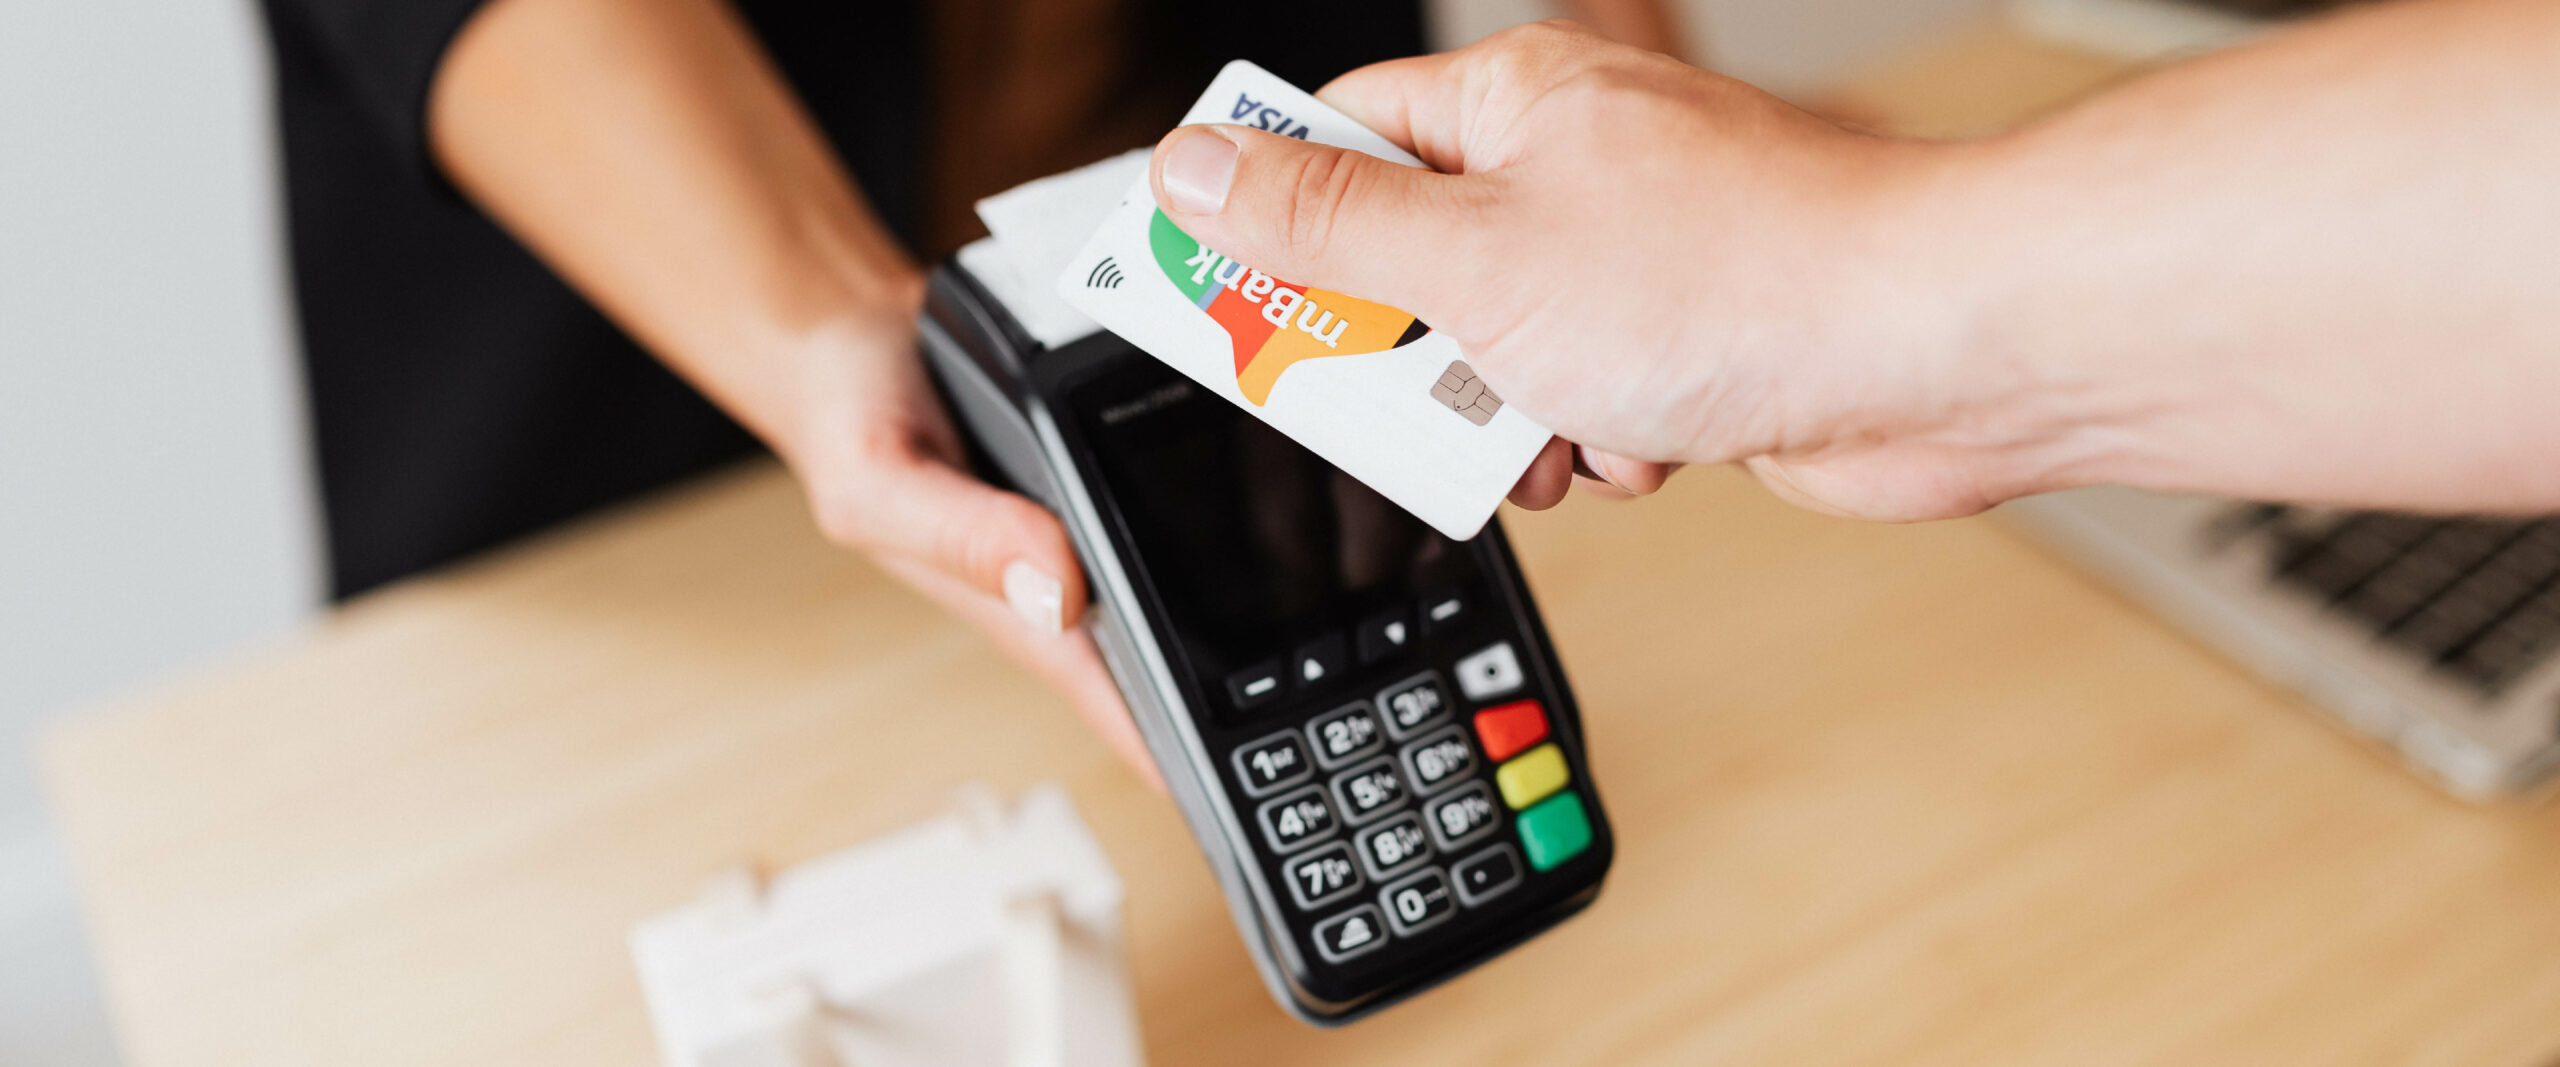 How to accept card payments: A guide for businesses